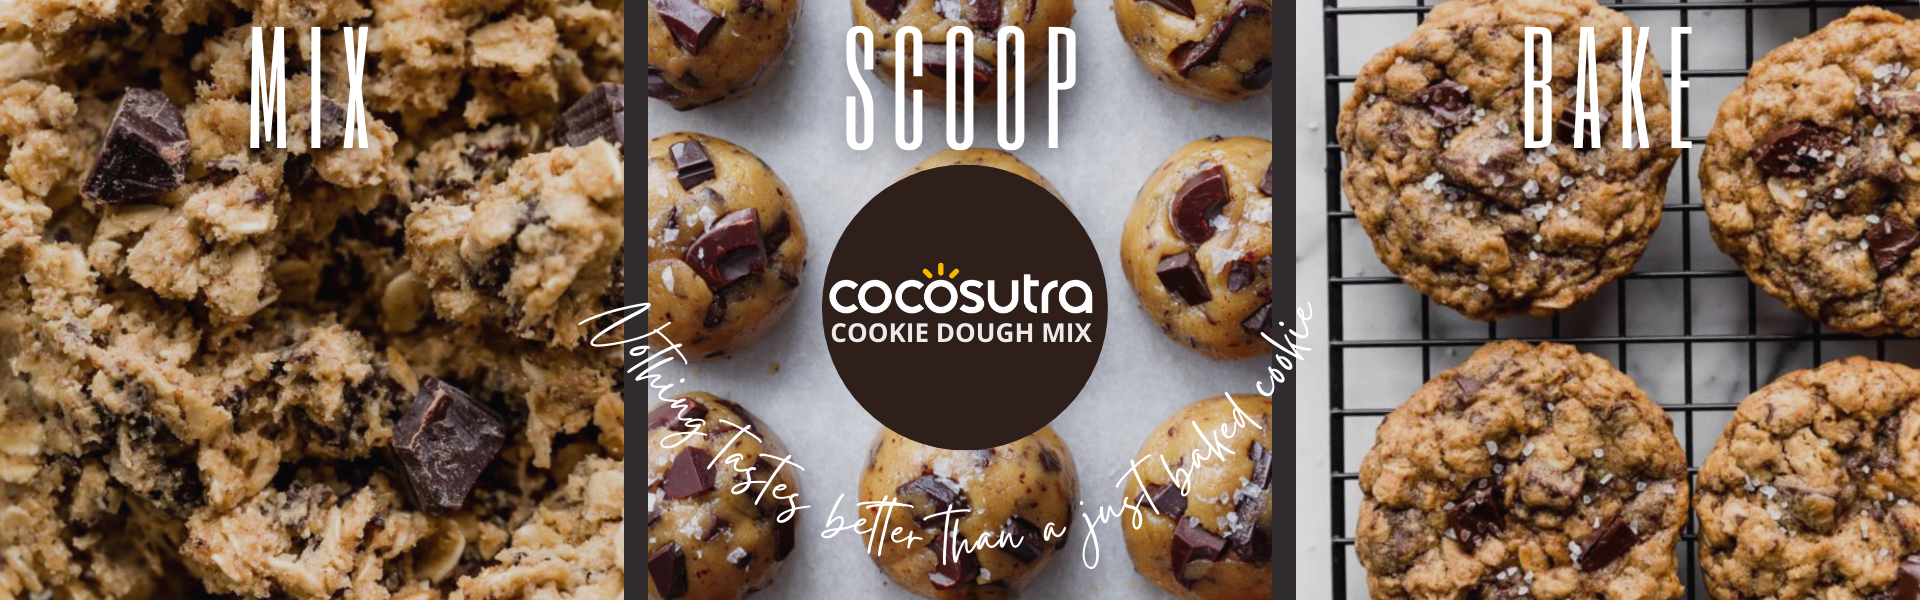 Cocosutra - Cookie Dough Mix